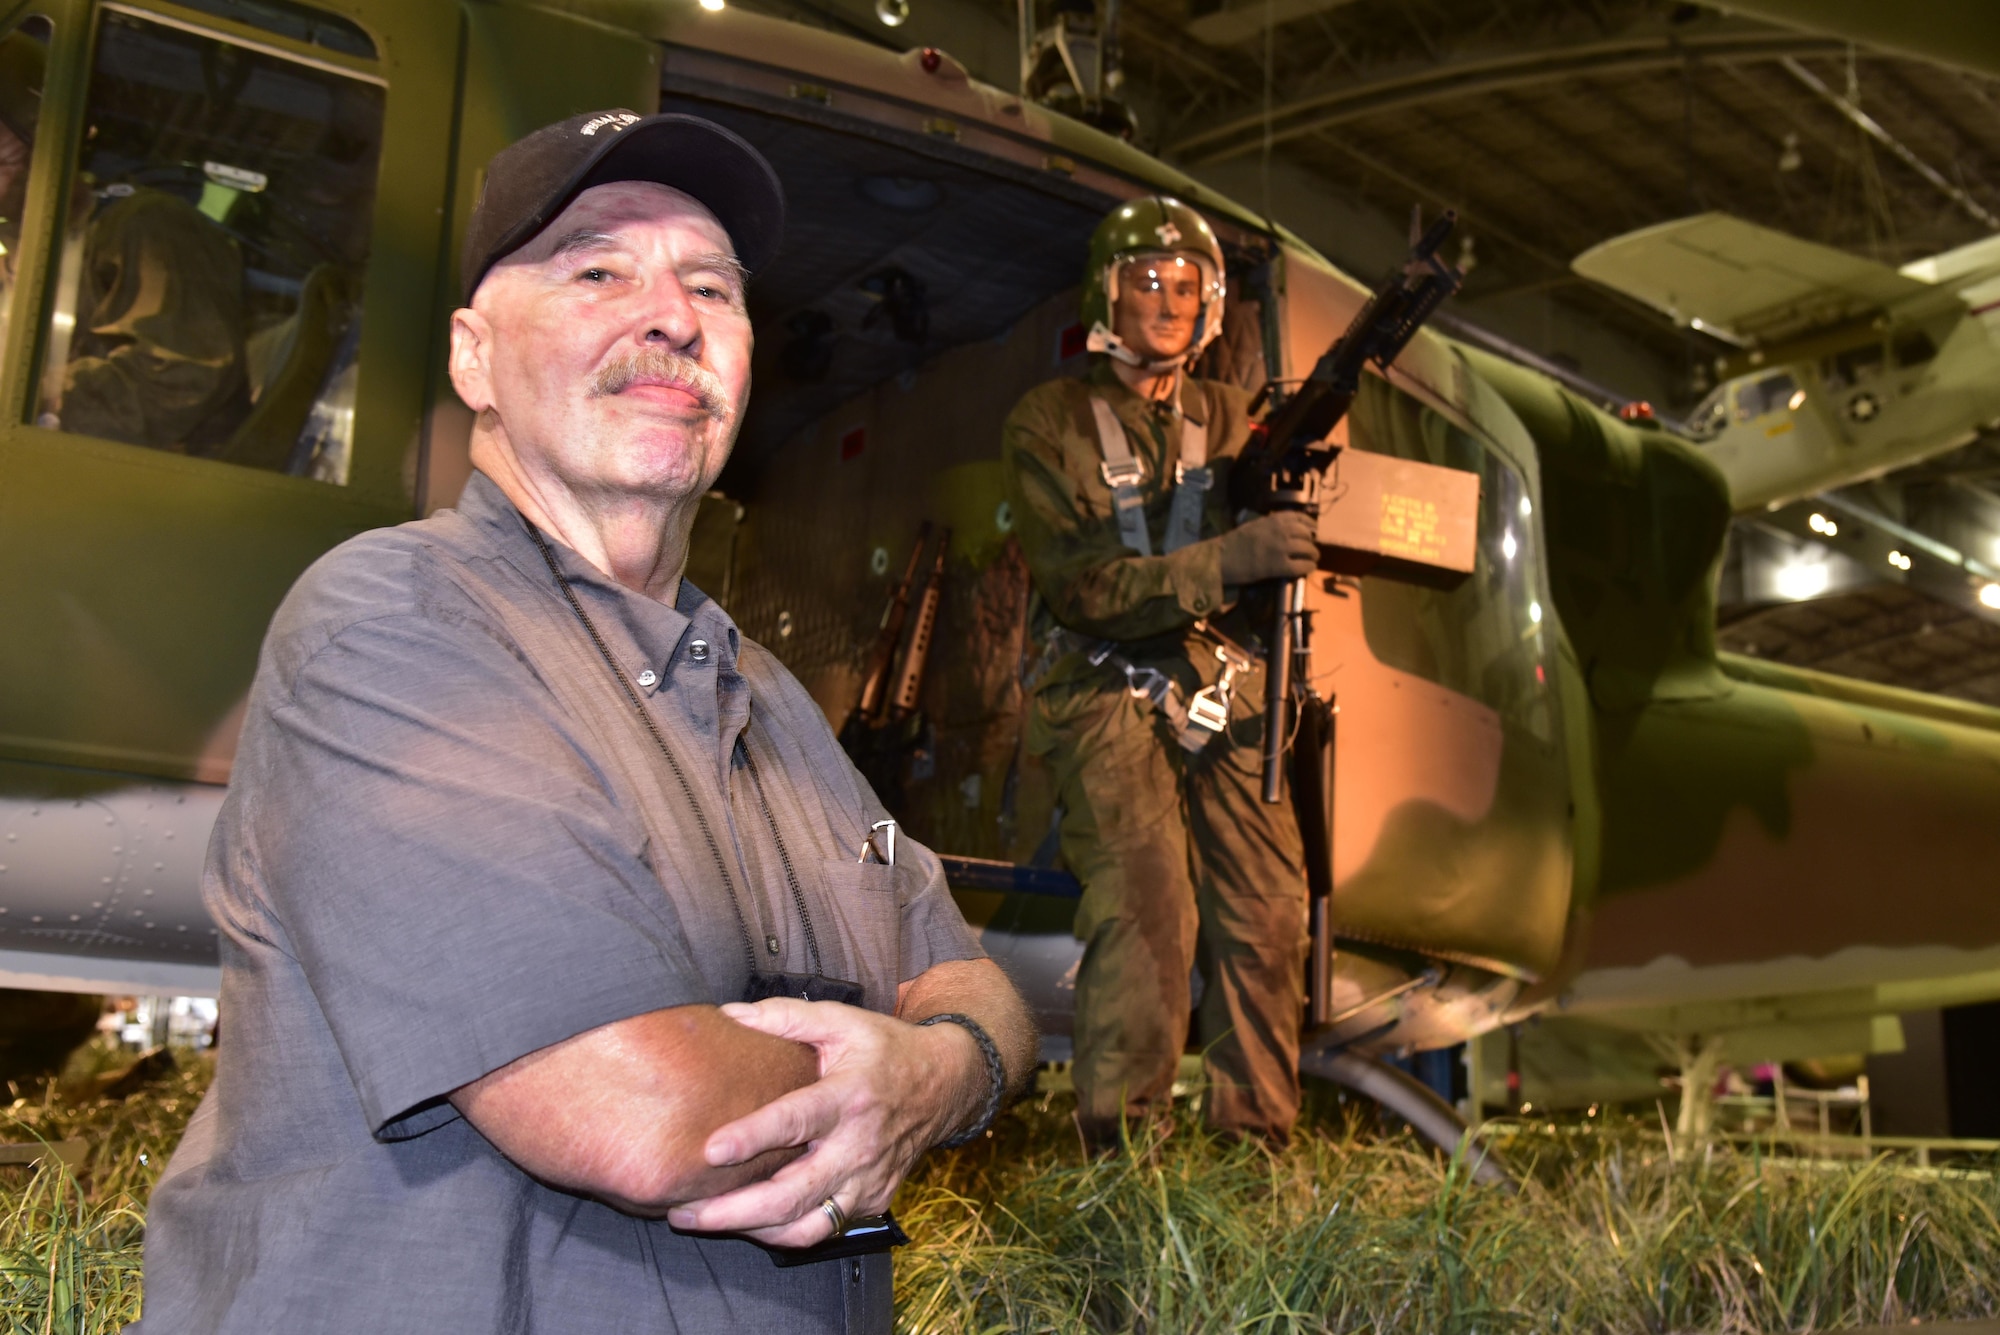 DAYTON, Ohio -- SSgt. Paul Jensen stands in front of the Secret War diorama in the Southeast Asia War Gallery at the National Museum of the U.S. Air Force on Sept. 15, 2016. From 1967 to 1971, he served in the U.S. Air Force with duties as Helicopter Tech/door gunner. Served combat tours in Vietnam from 1968 to 1969 and 1970-1971with the 20th SOS “Green Hornets” as a Sgt. (E-4) Flight Mechanic/Gunner on UH-1F/P “slicks.” Jensen was the left door gunner on the 26 Nov 1968 mission that is depicted in the National Museum of the U.S. Air Force’s UH-1P, 20th SOS “Green Hornets,” legacy diorama display. He was awarded the Distinguished Flying Cross for Valor for his part in this mission.U.S. Air Force photo by Ken LaRock)
